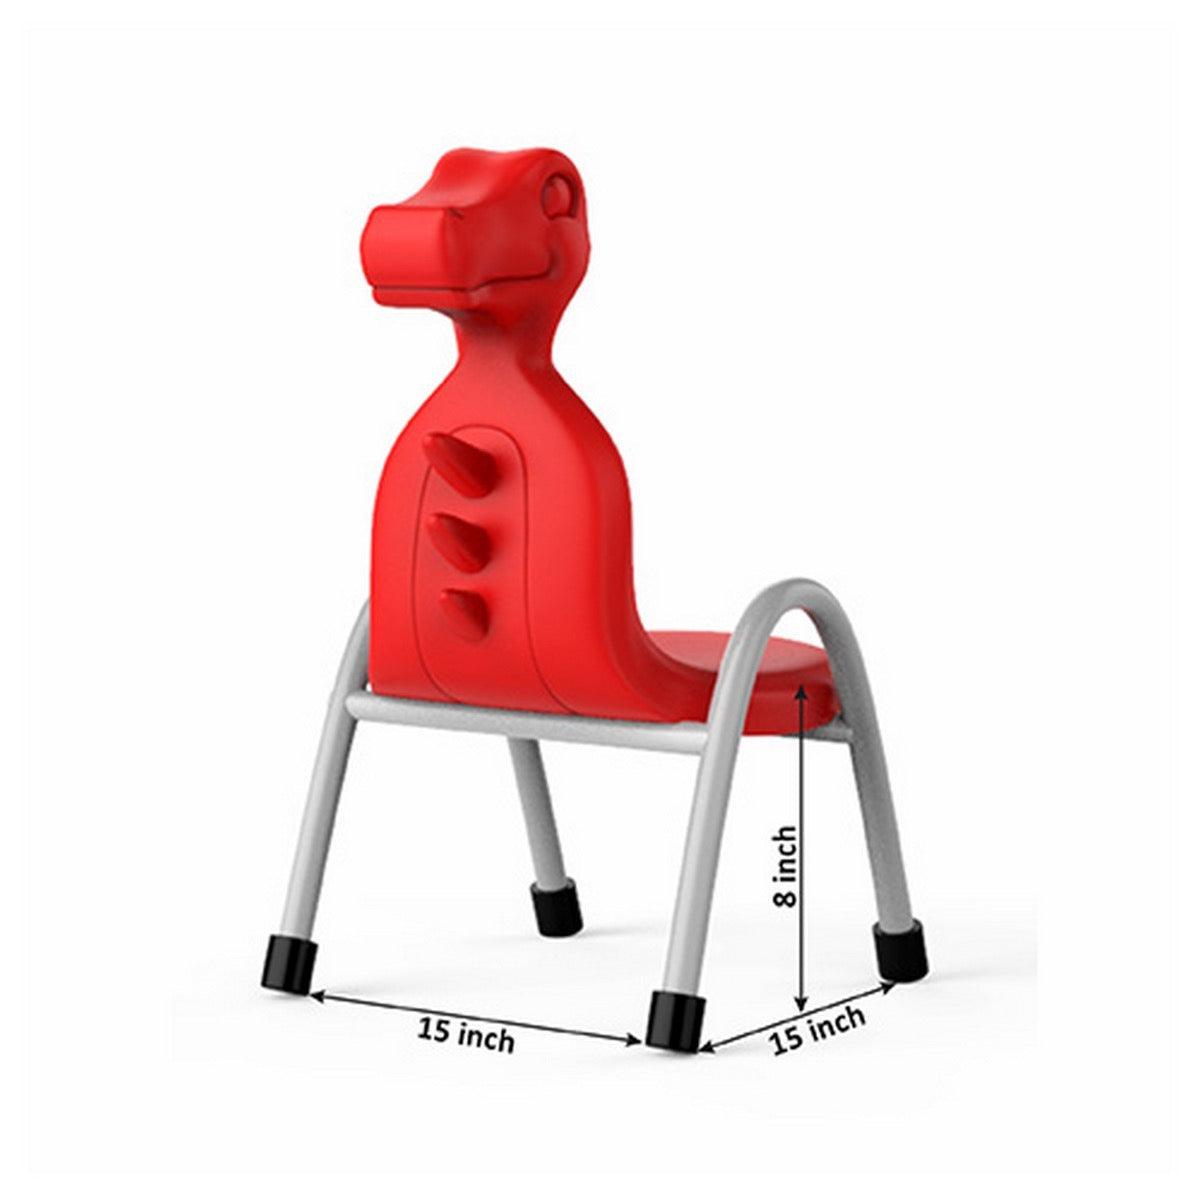 Ok Play Dino Chair, Study Chair, Sturdy And Durable Chair, Plastic Chair, Perfect For Home, Creches And School, Red, 2 to 4 Years, Height 8 Inches